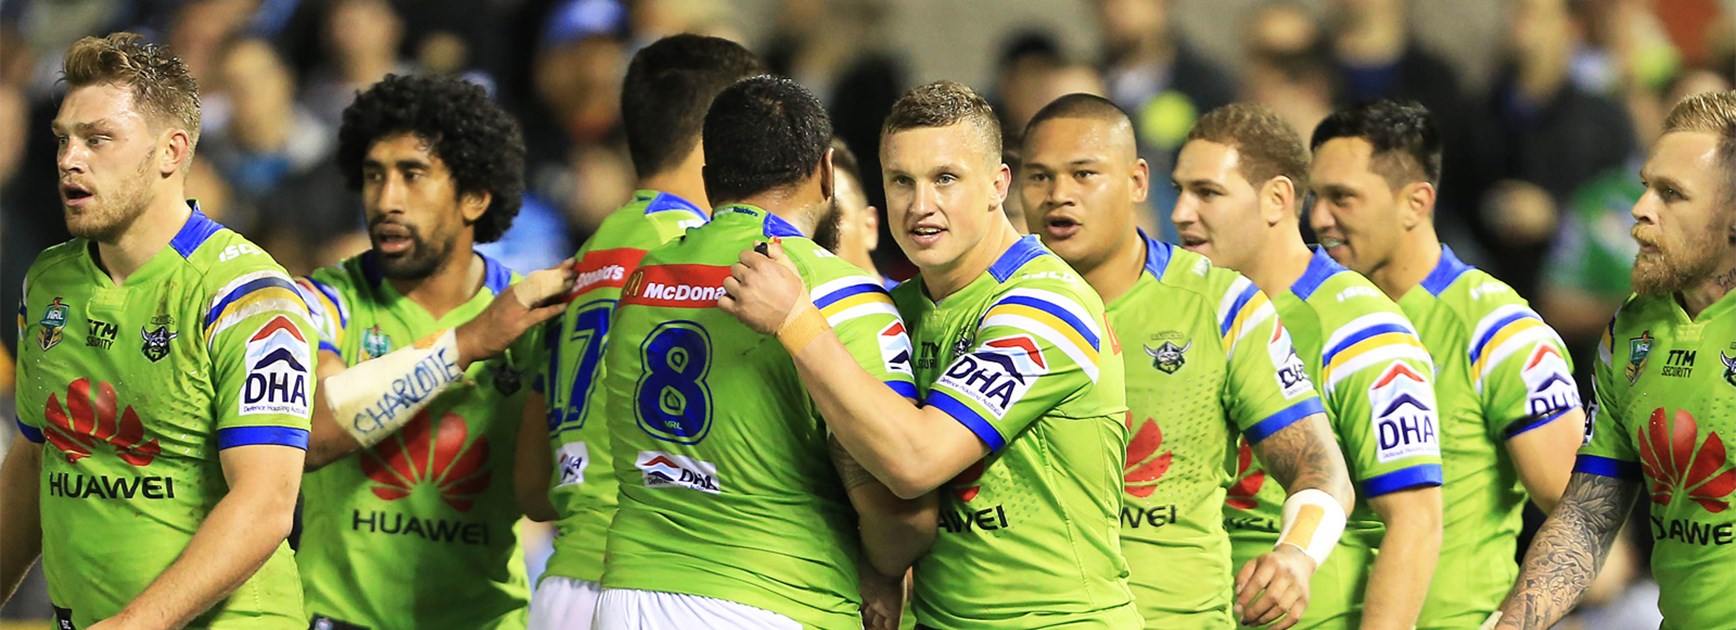 The Canberra Raiders celebrate during their Round 22 win over Canberra.